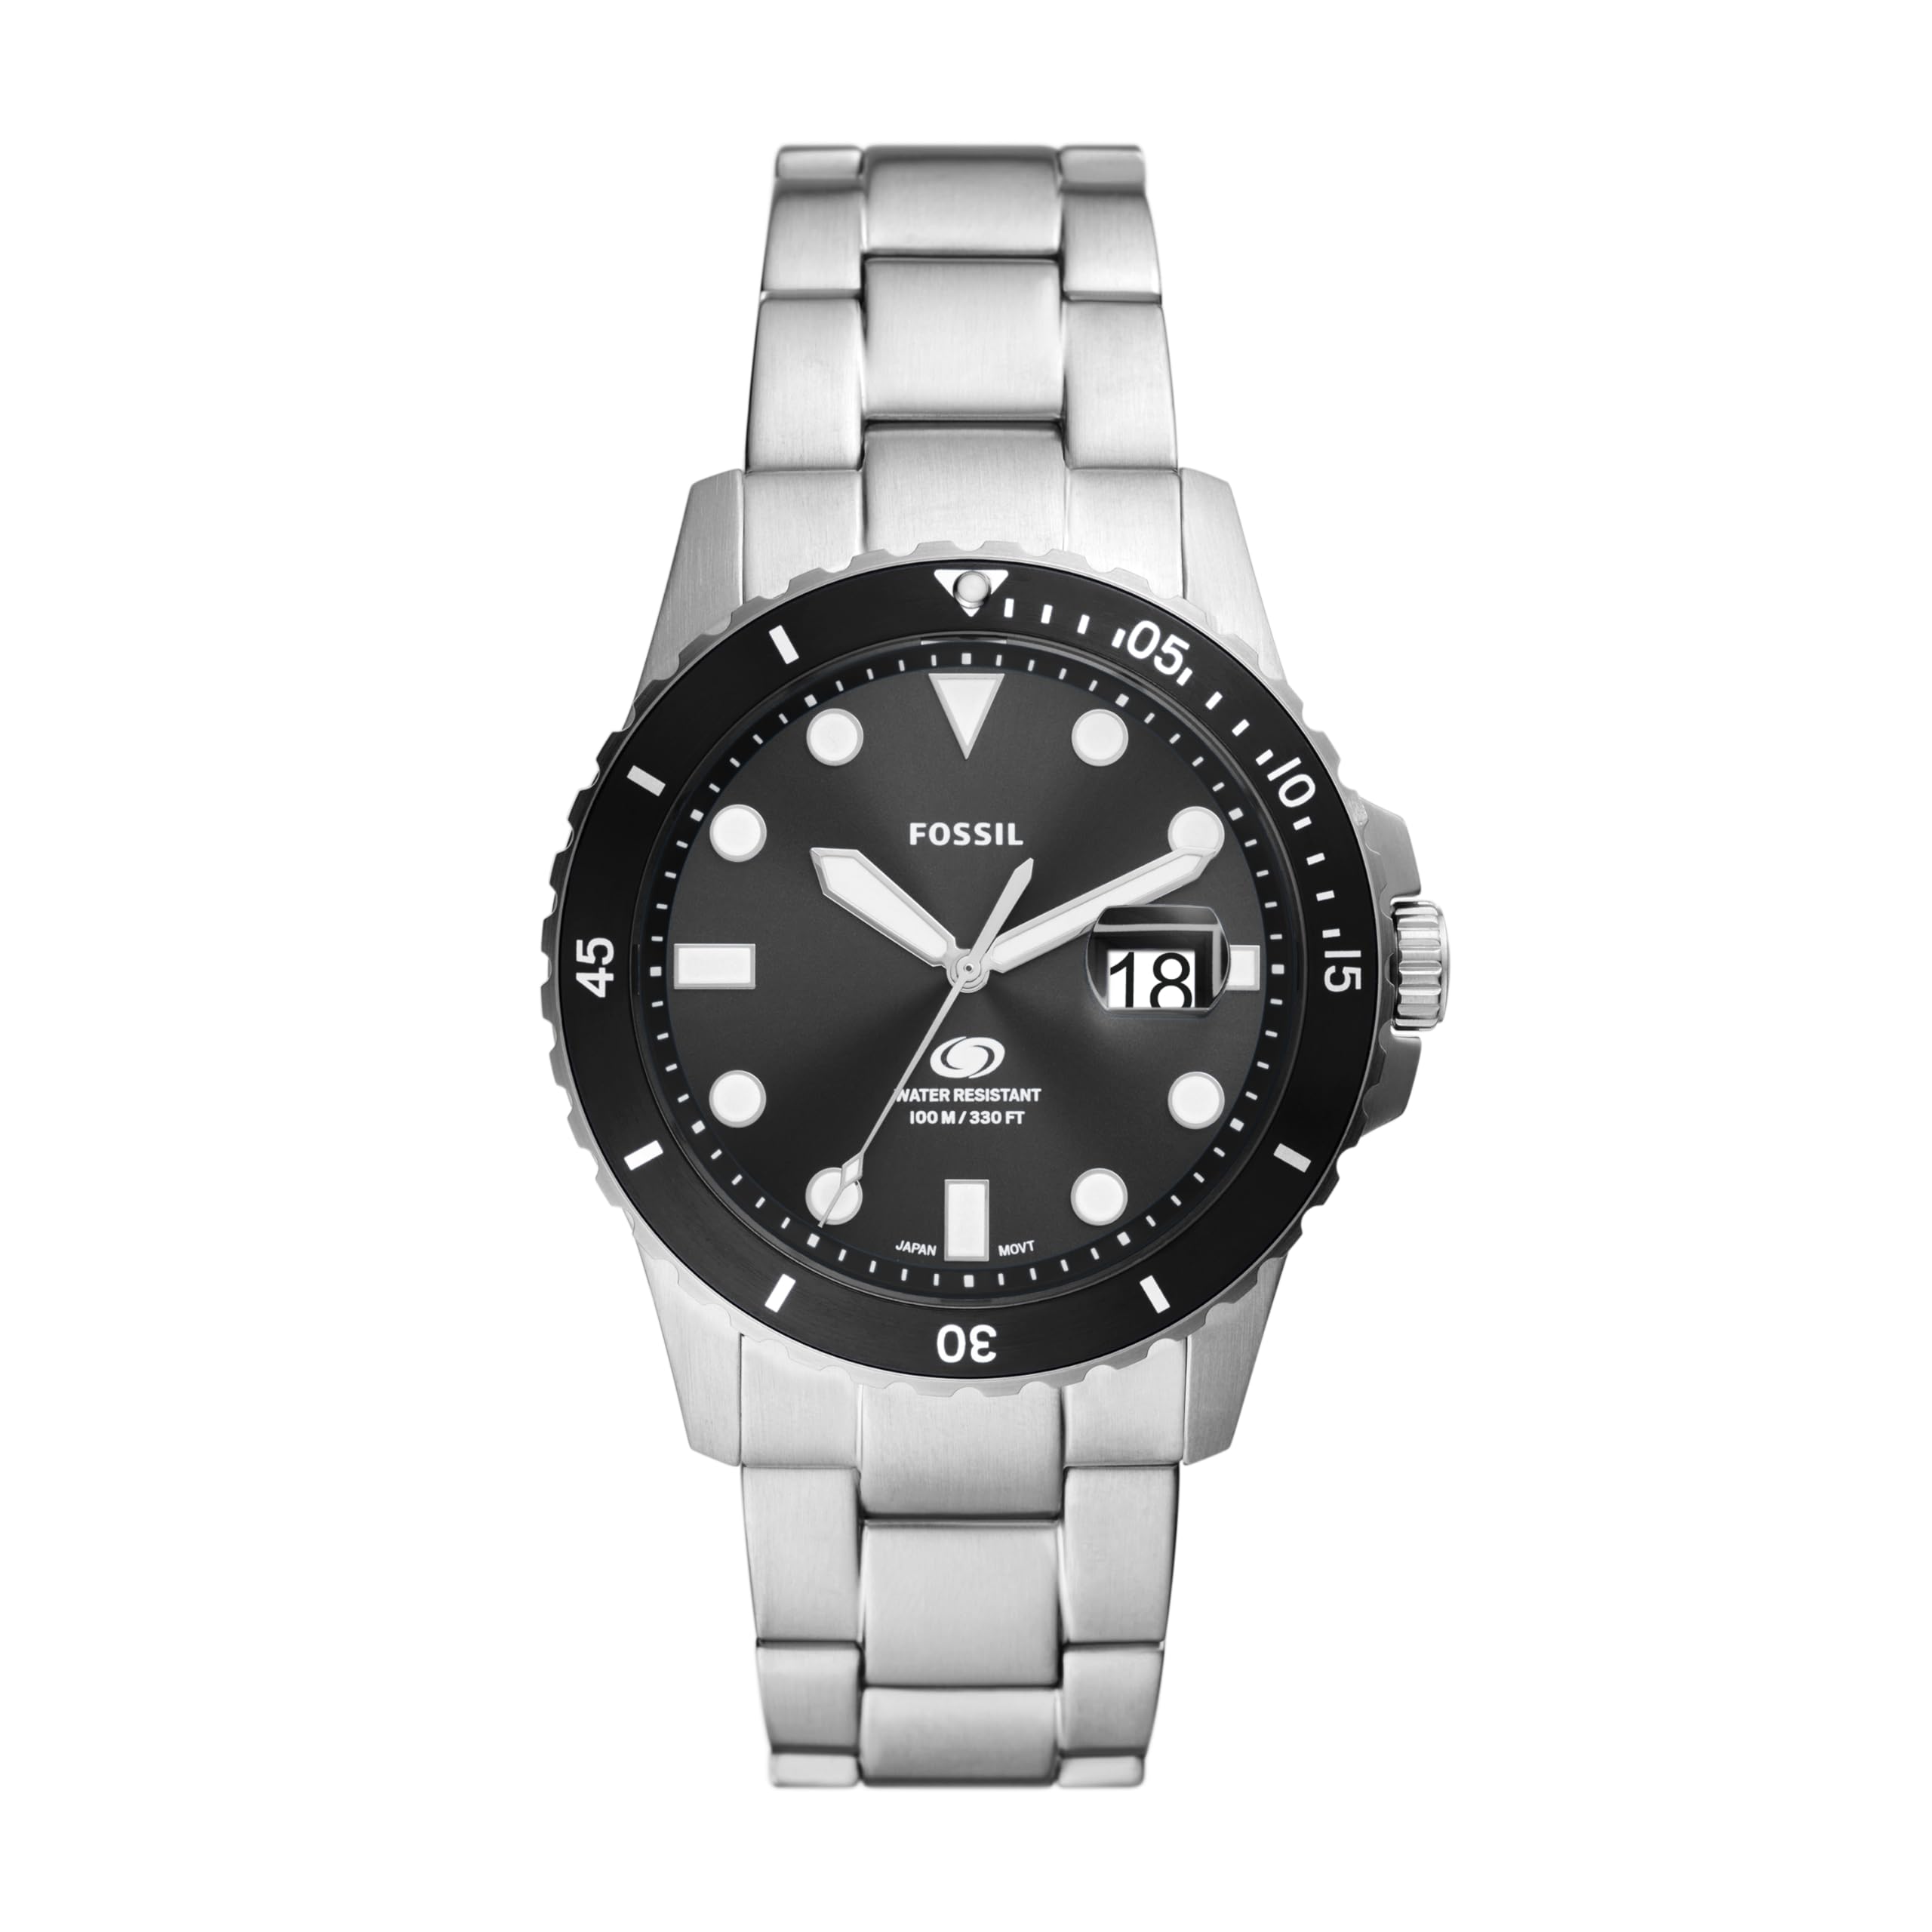 Fossil Men's Blue Quartz Stainless Steel Three-Hand Watch, Color: Silver/Black Taper (Model: FS6032)